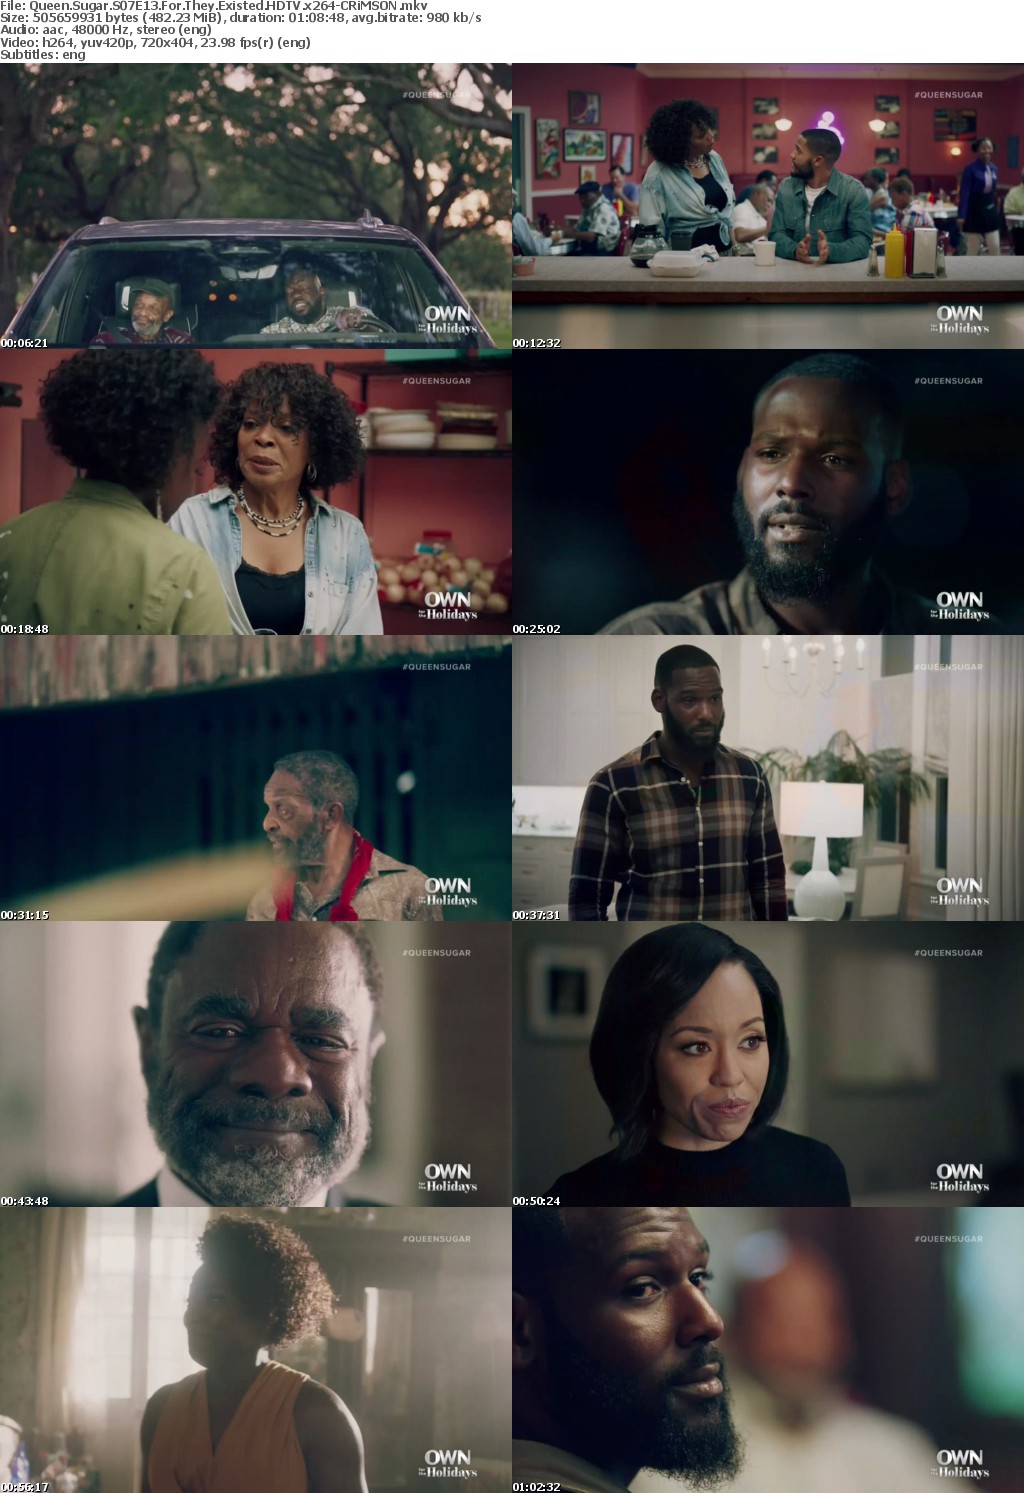 Queen Sugar S07E13 For They Existed HDTV x264-CRiMSON